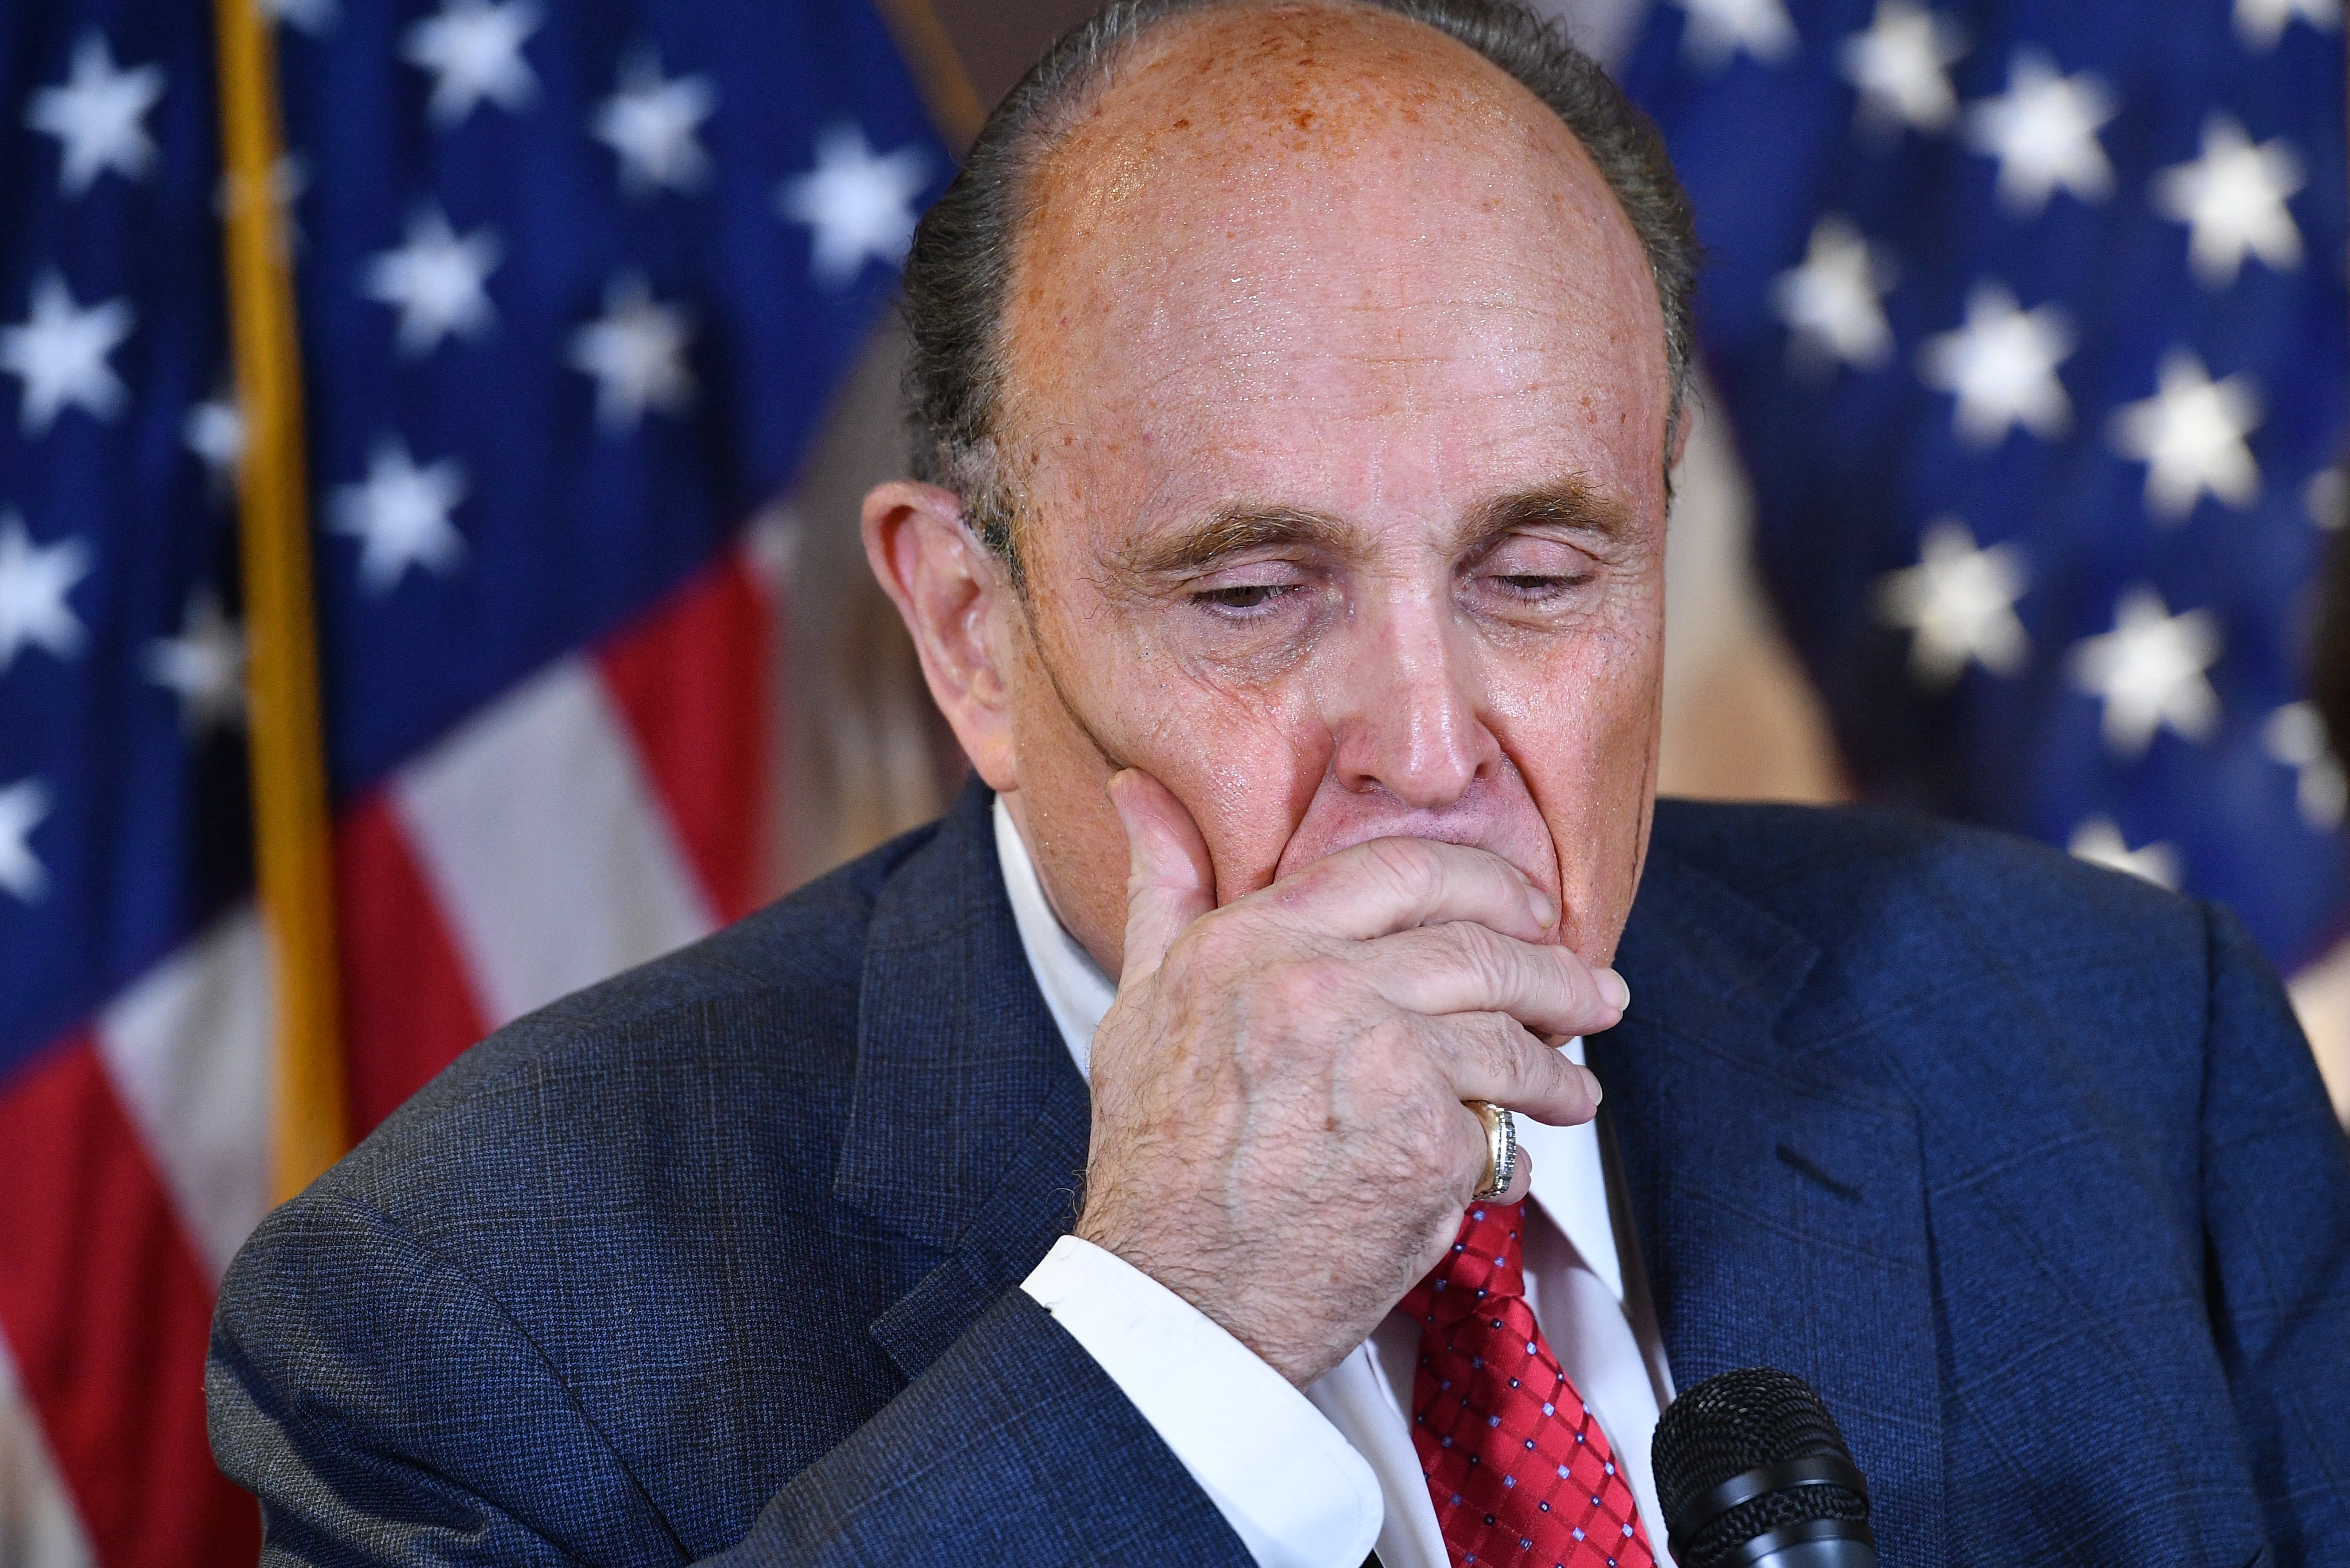 Rudy Giuliani speaks at a press conference at the Republican National Committee headquarters in 2020. His false claims about election workers that year are central to a blockbuster defamation verdict against him. He declared bankruptcy in 2023 shortly after he was ordered to pay $148 million.